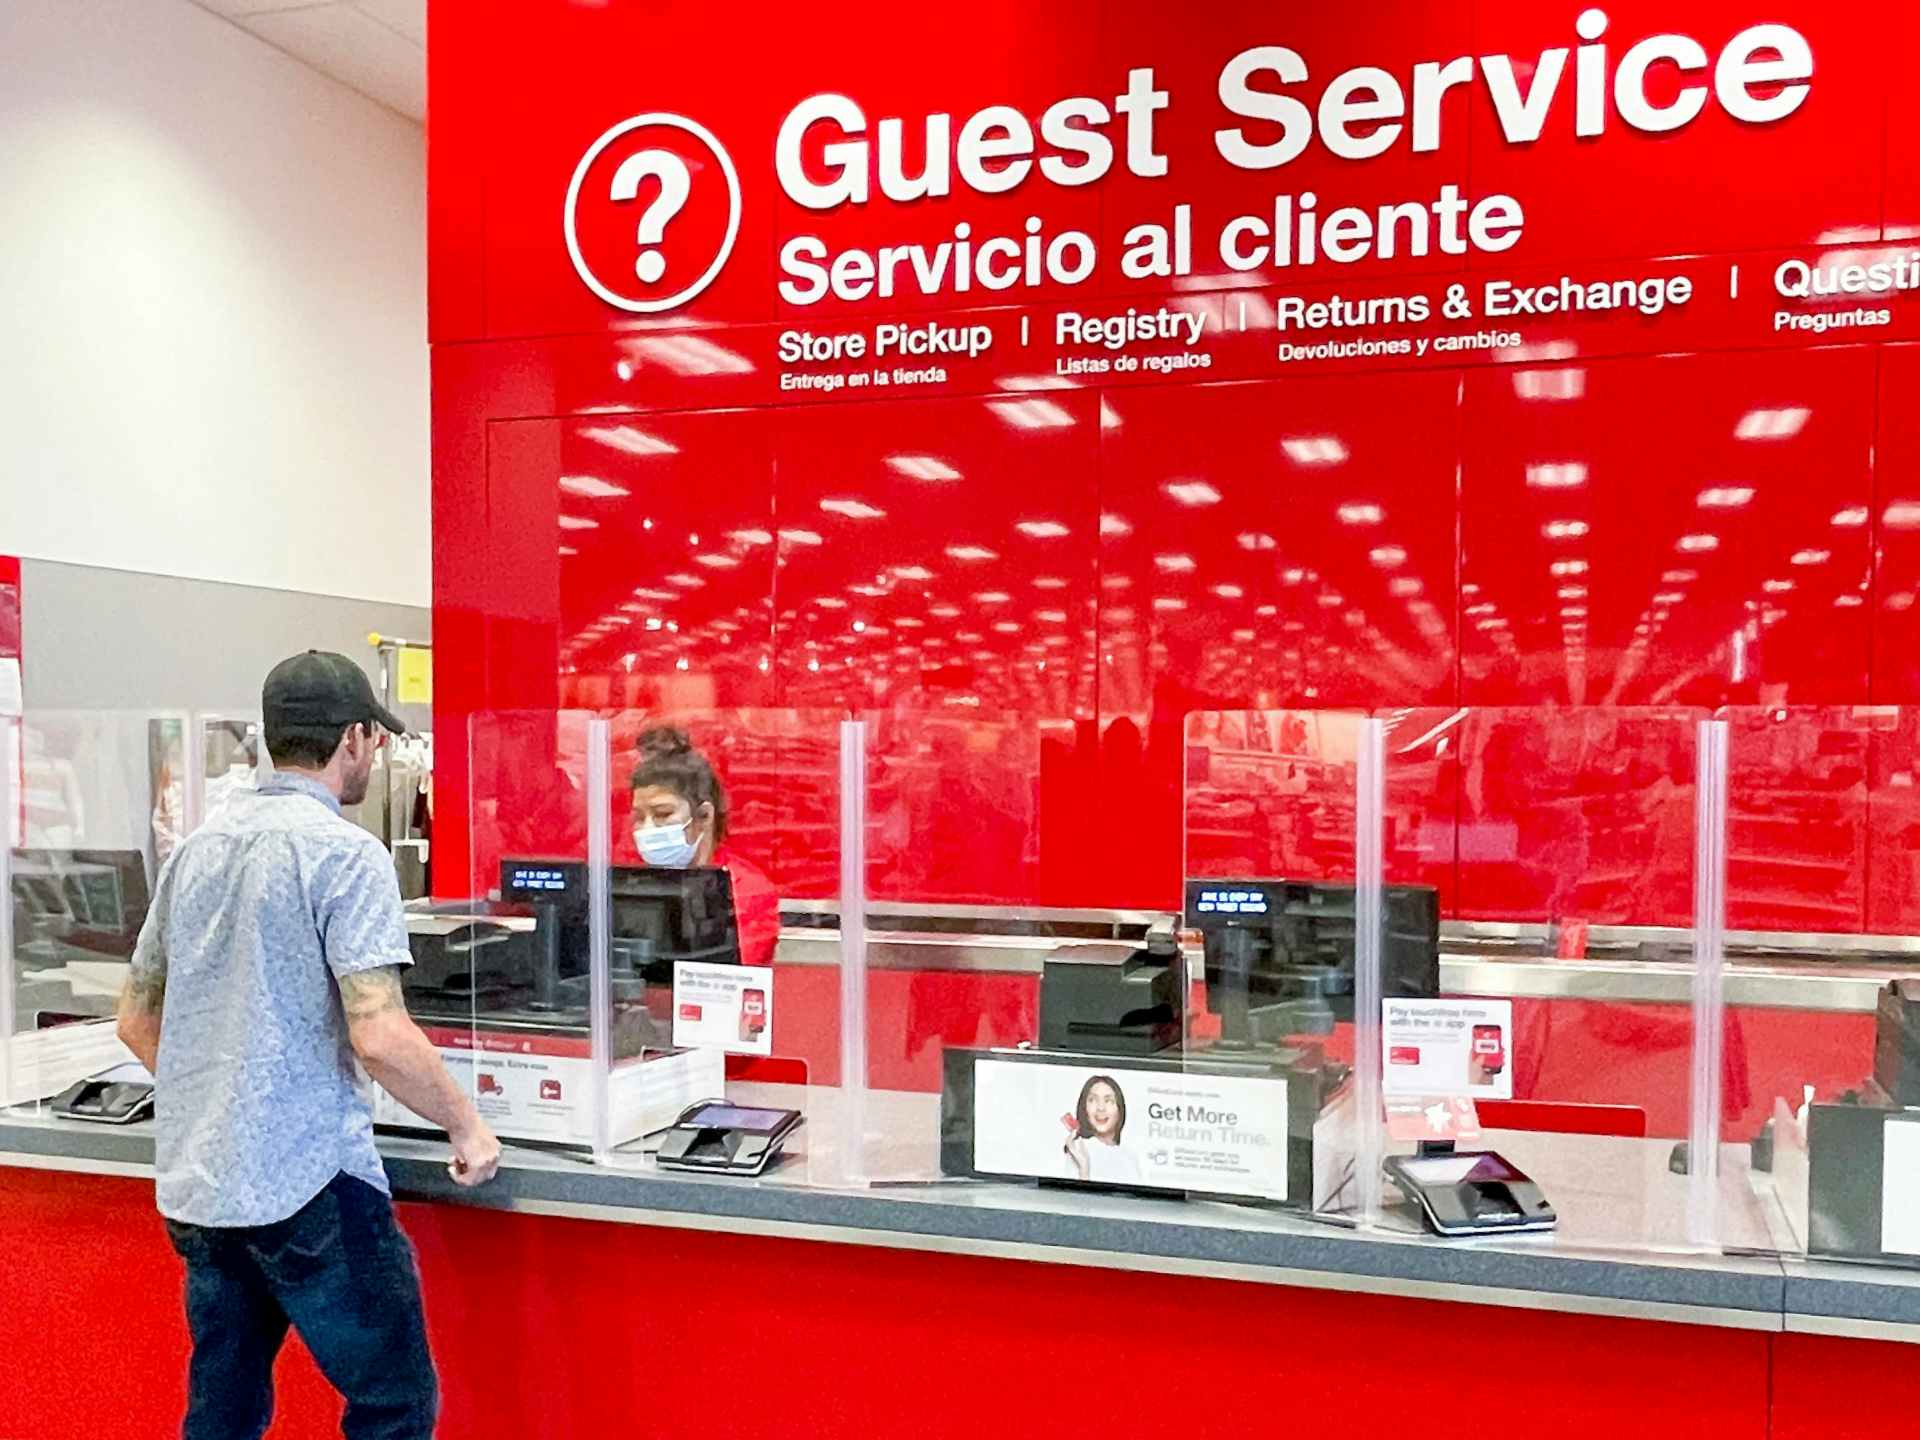 A man talking to an employee at the Target guest service counter.